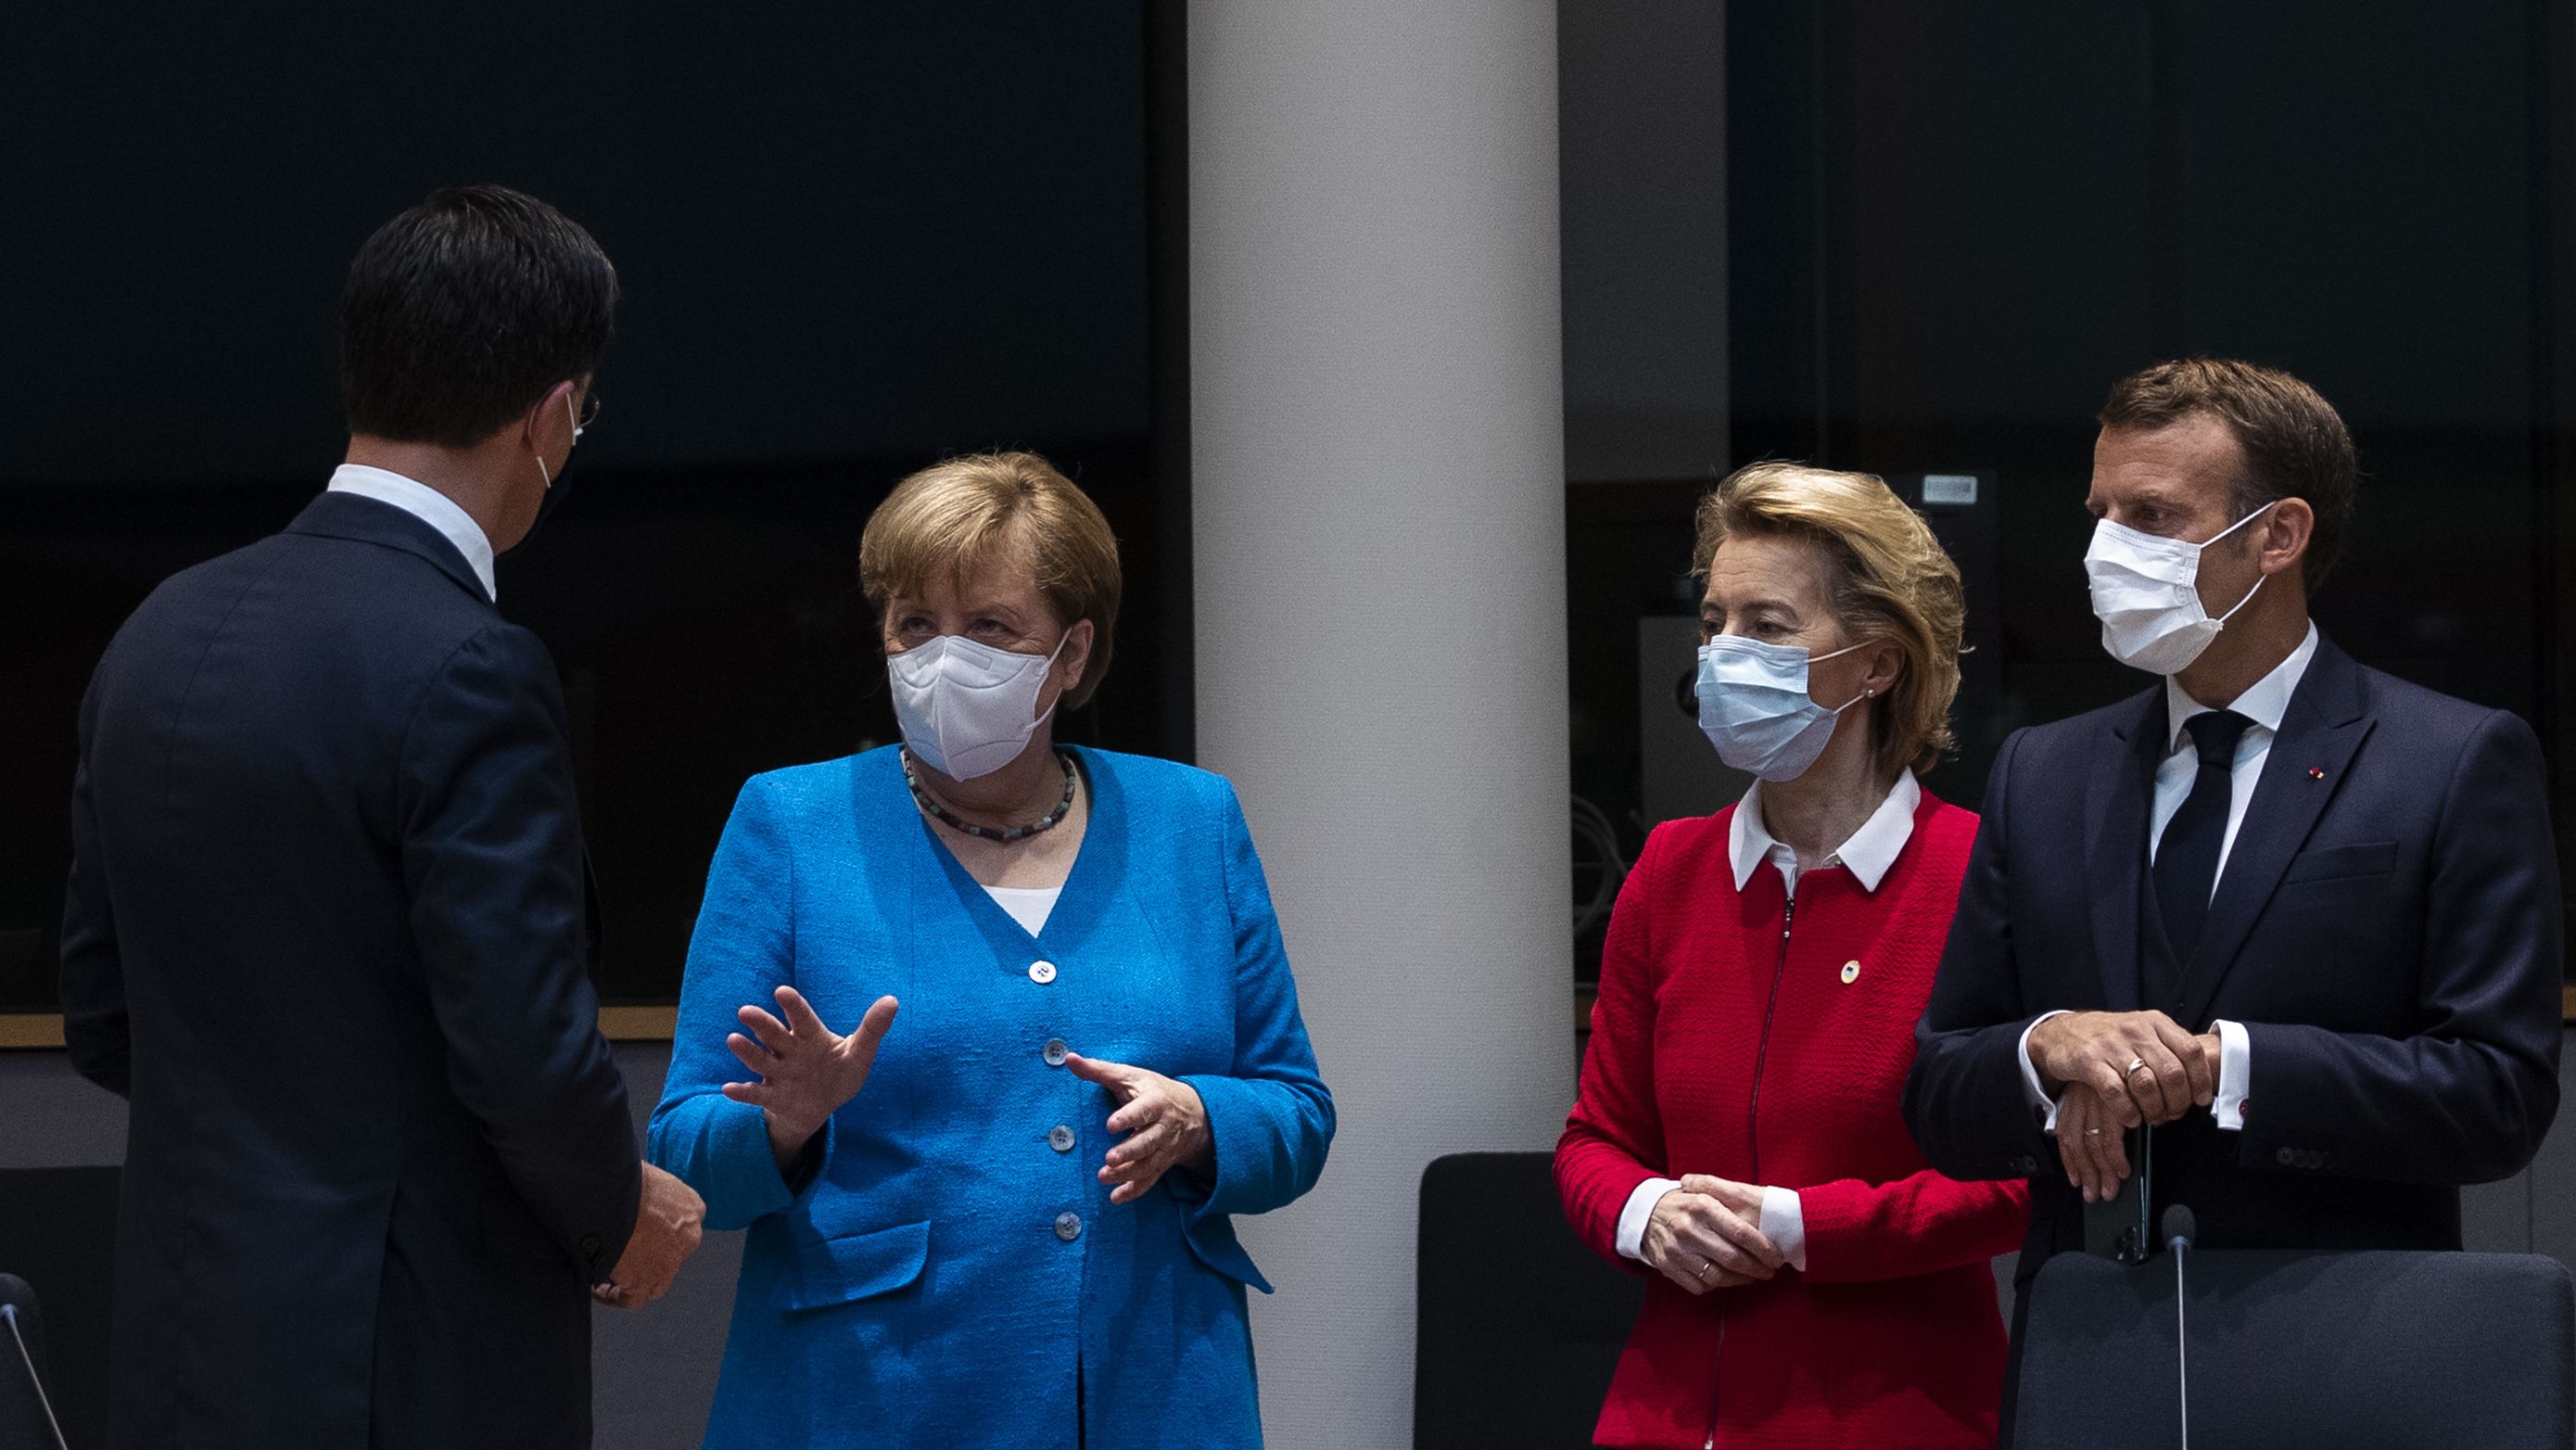 Many believe Ursula von der Leyen, second from right, rather than acting as guardian of the EU's treaties, is acting in the interests of the governments of the 27 EU nations.